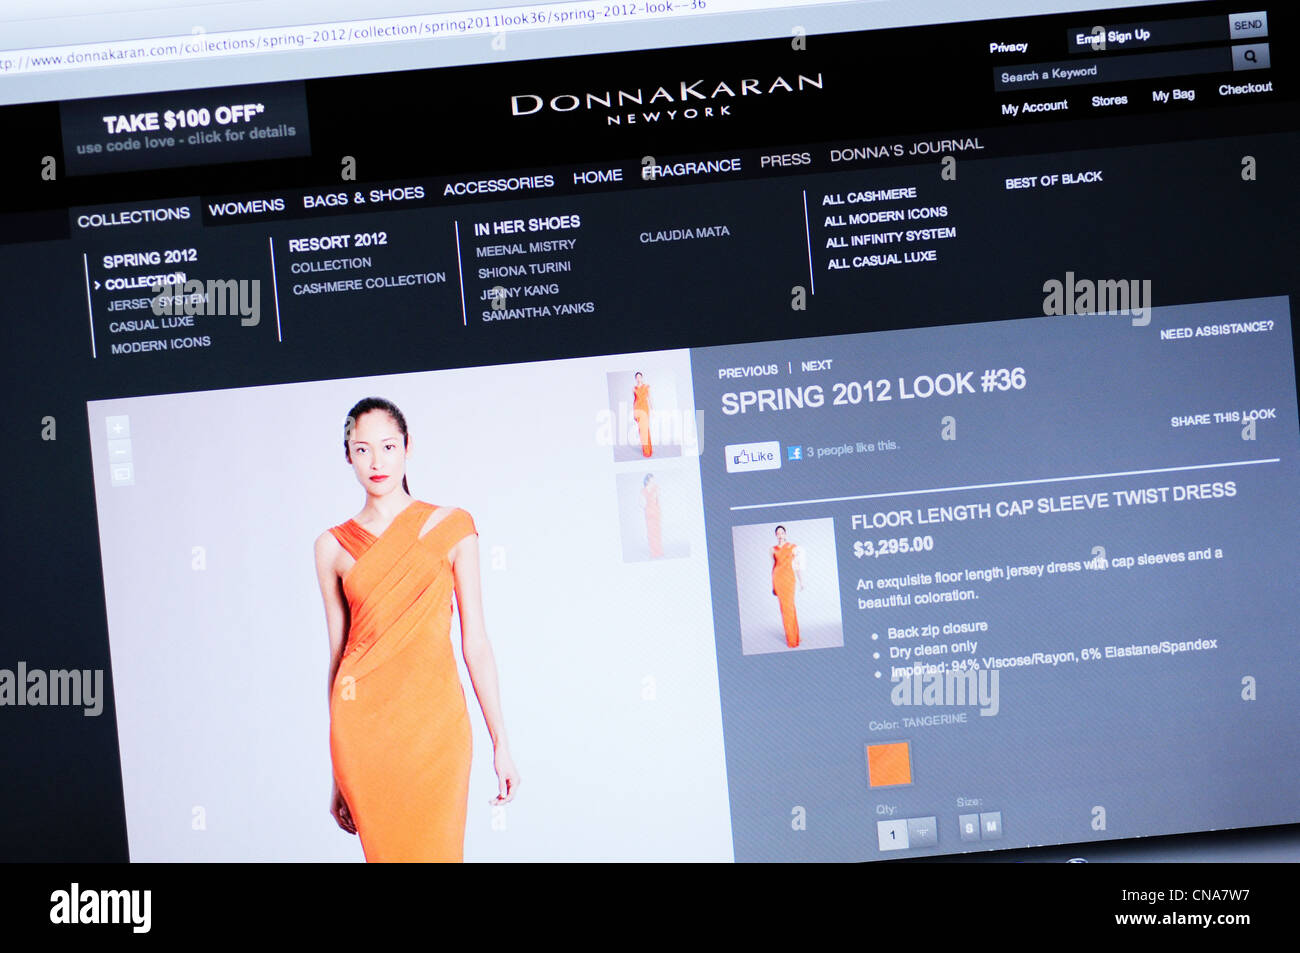 Donna Karan - Official site and Online Store